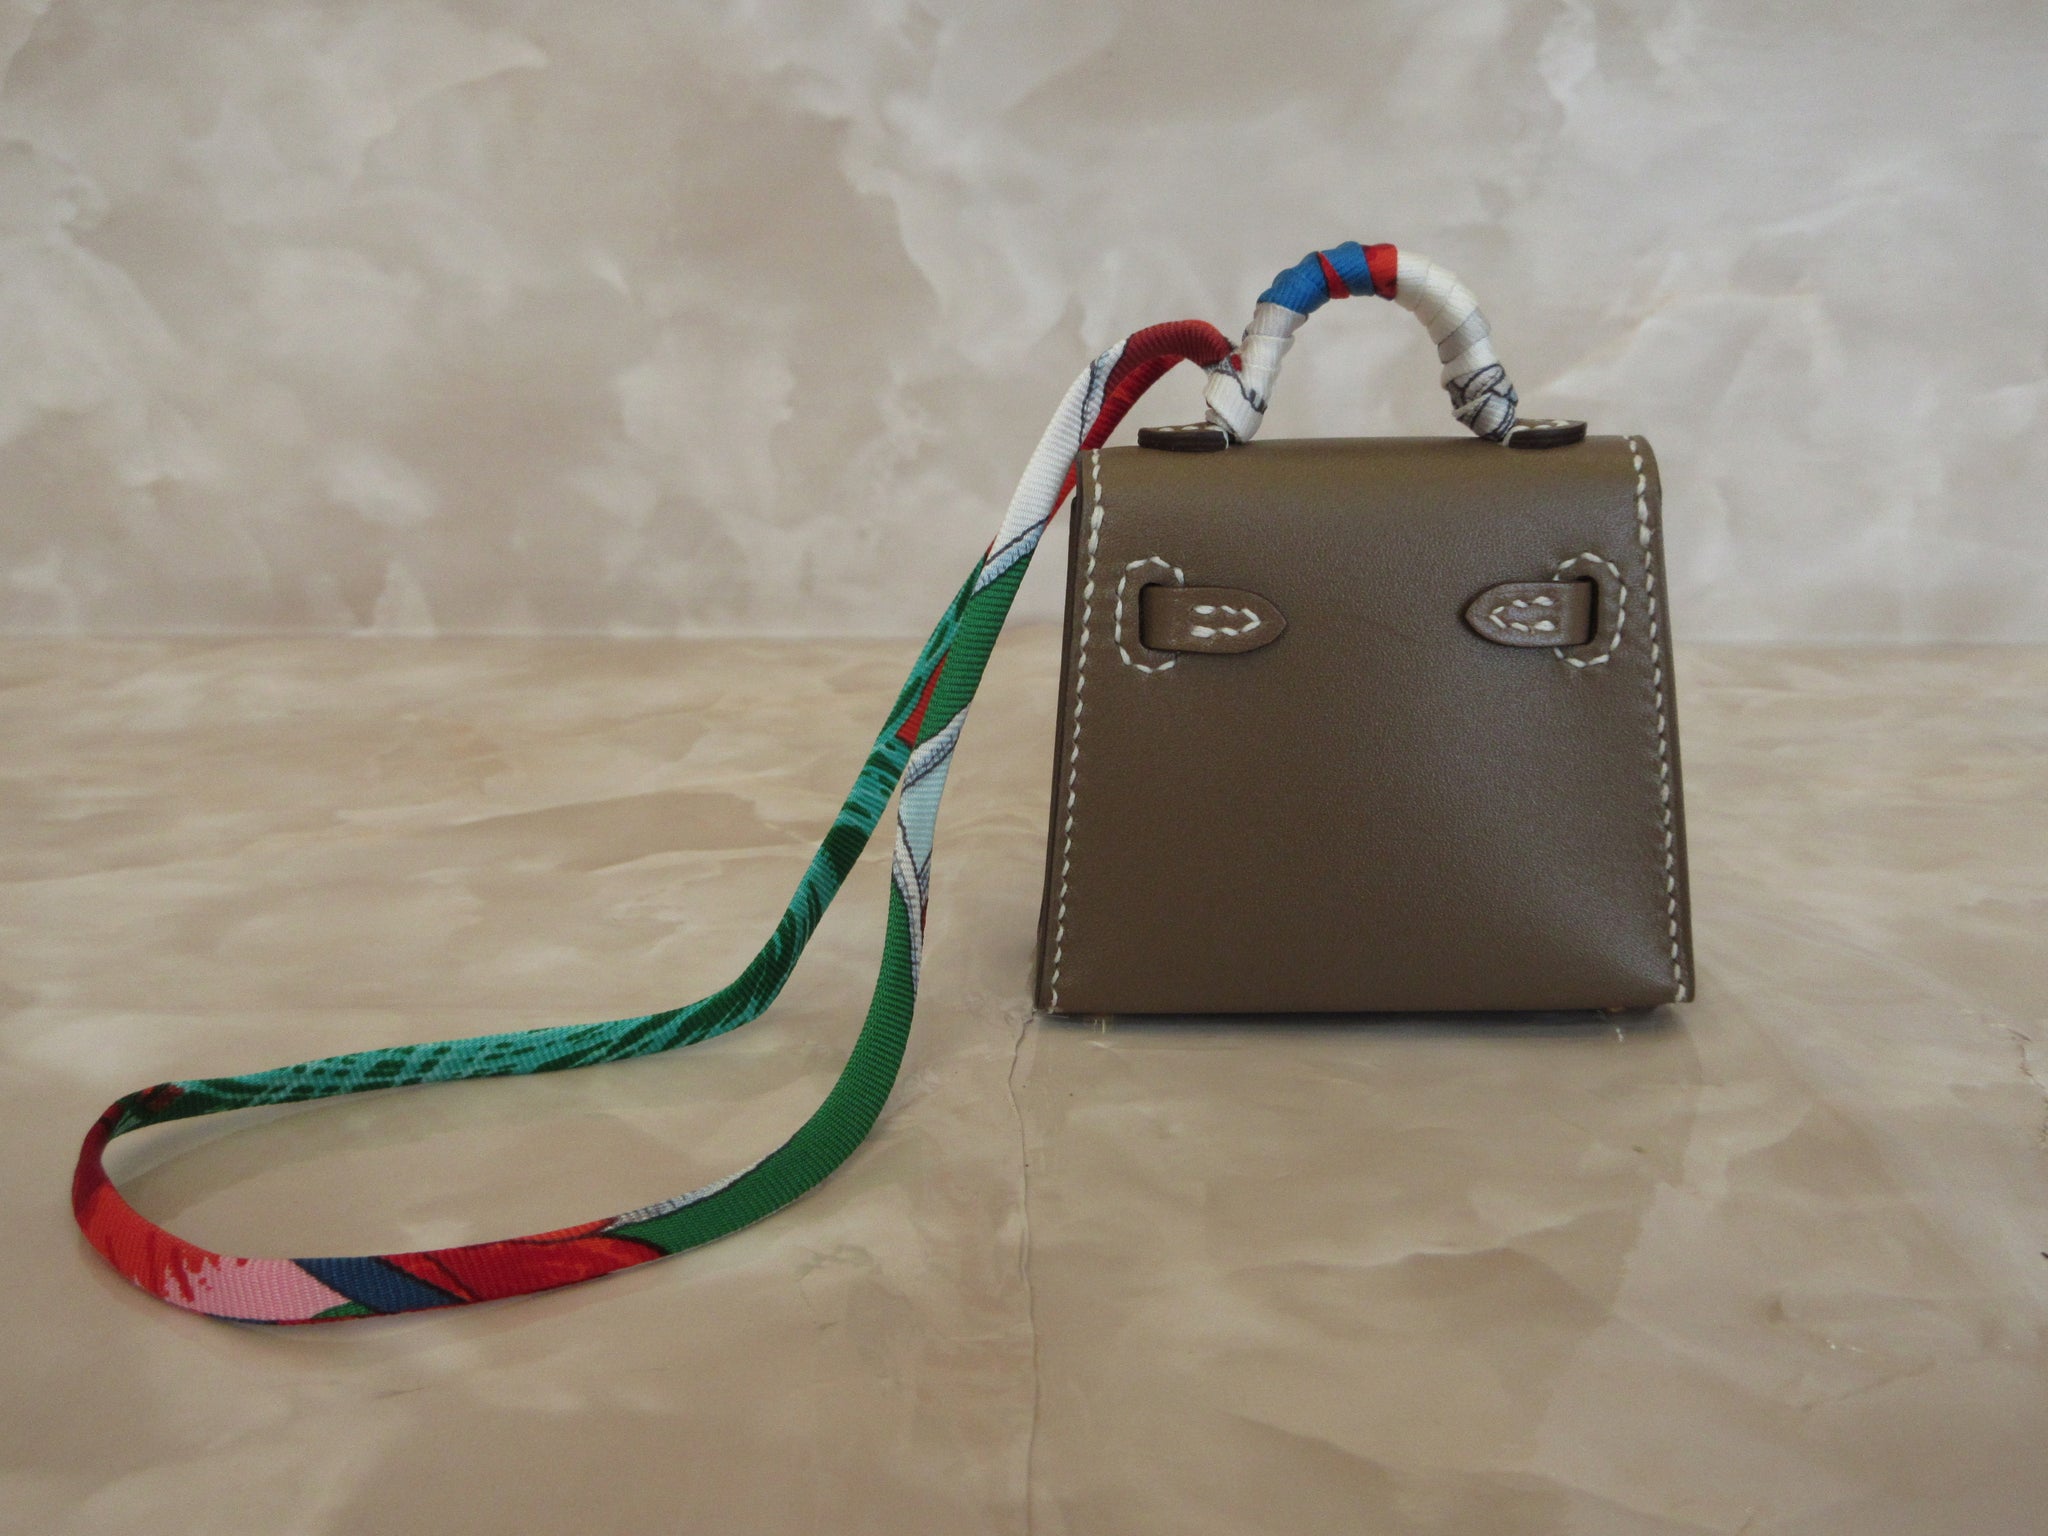 LOUIS VUITTON BAG CHARMS & HERMES TWILLY TUTORIAL